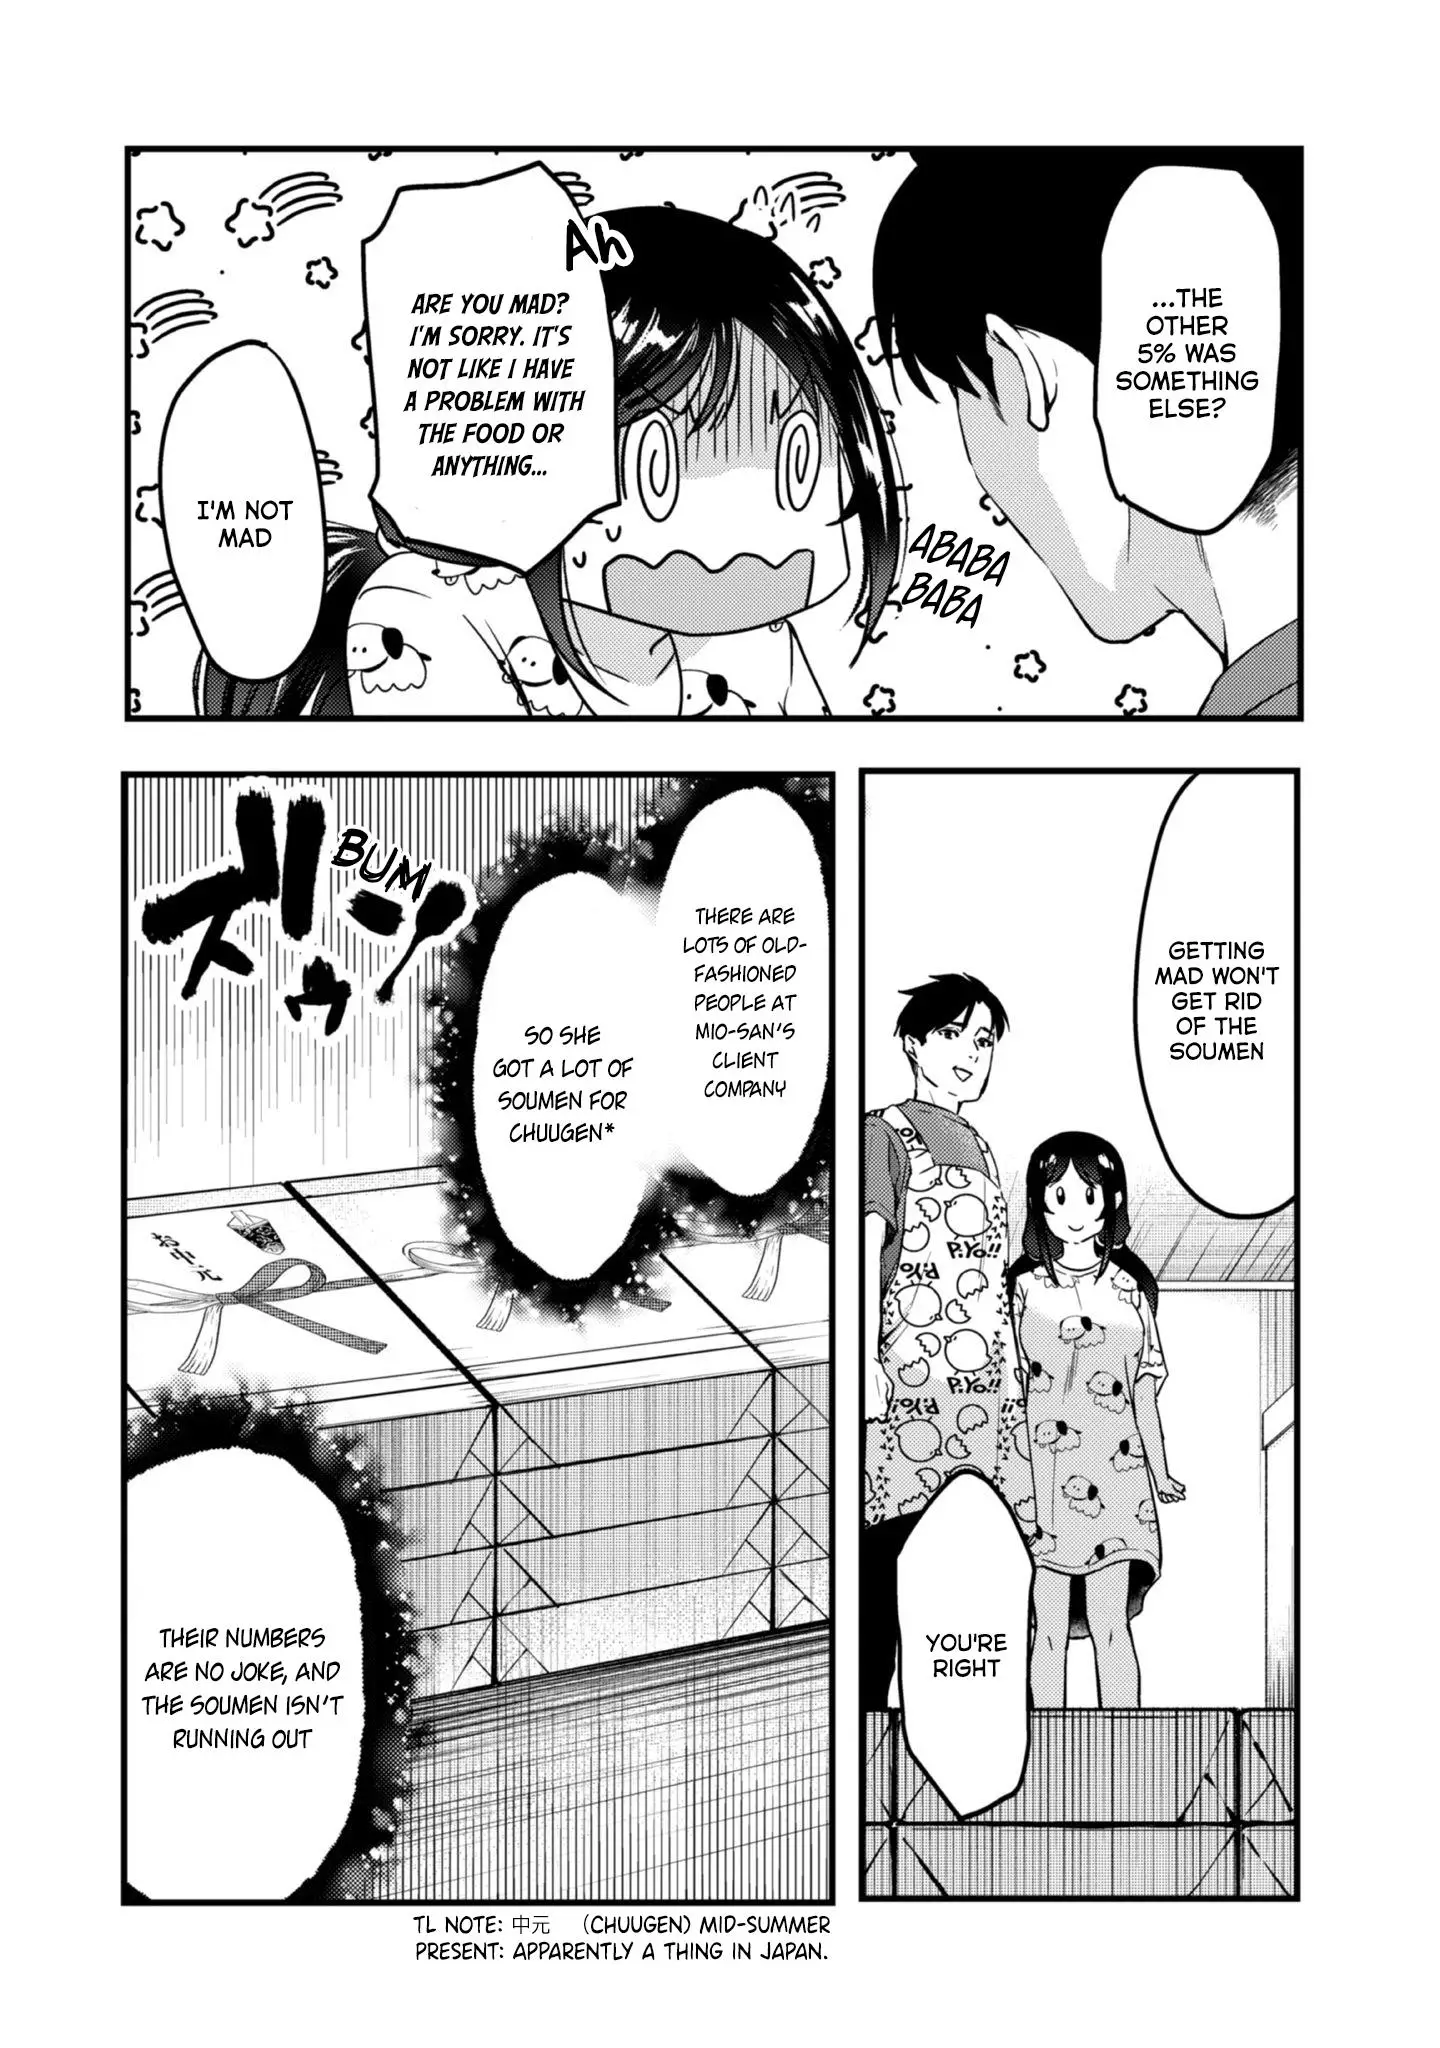 It’S Fun Having A 300,000 Yen A Month Job Welcoming Home An Onee-San Who Doesn’T Find Meaning In A Job That Pays Her 500,000 Yen A Month - 22 page 9-3be53889